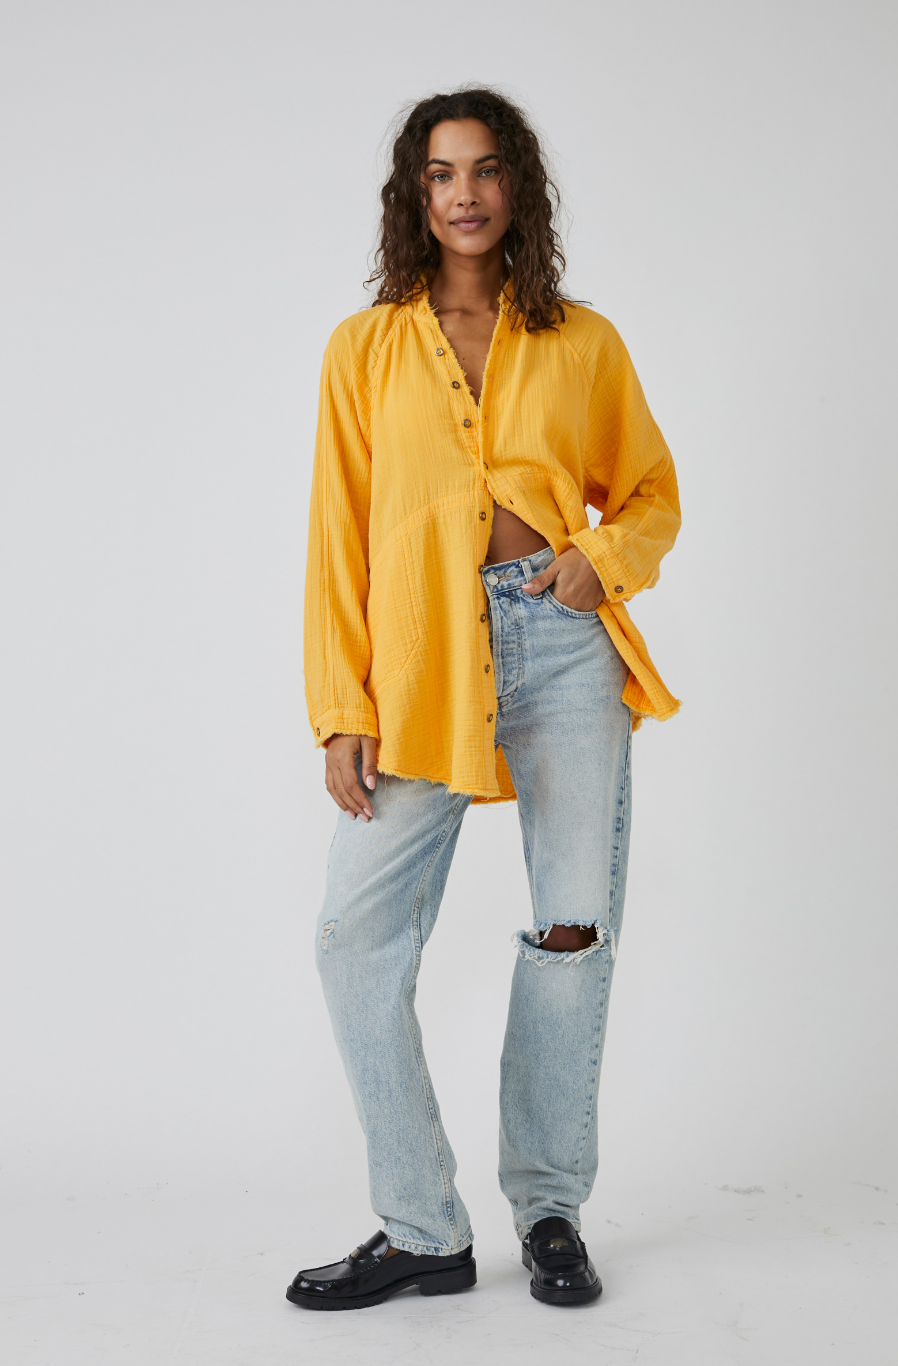 FREE PEOPLE SUMMER DAYDREAM TUNIC IN BIRD OF PARADISE